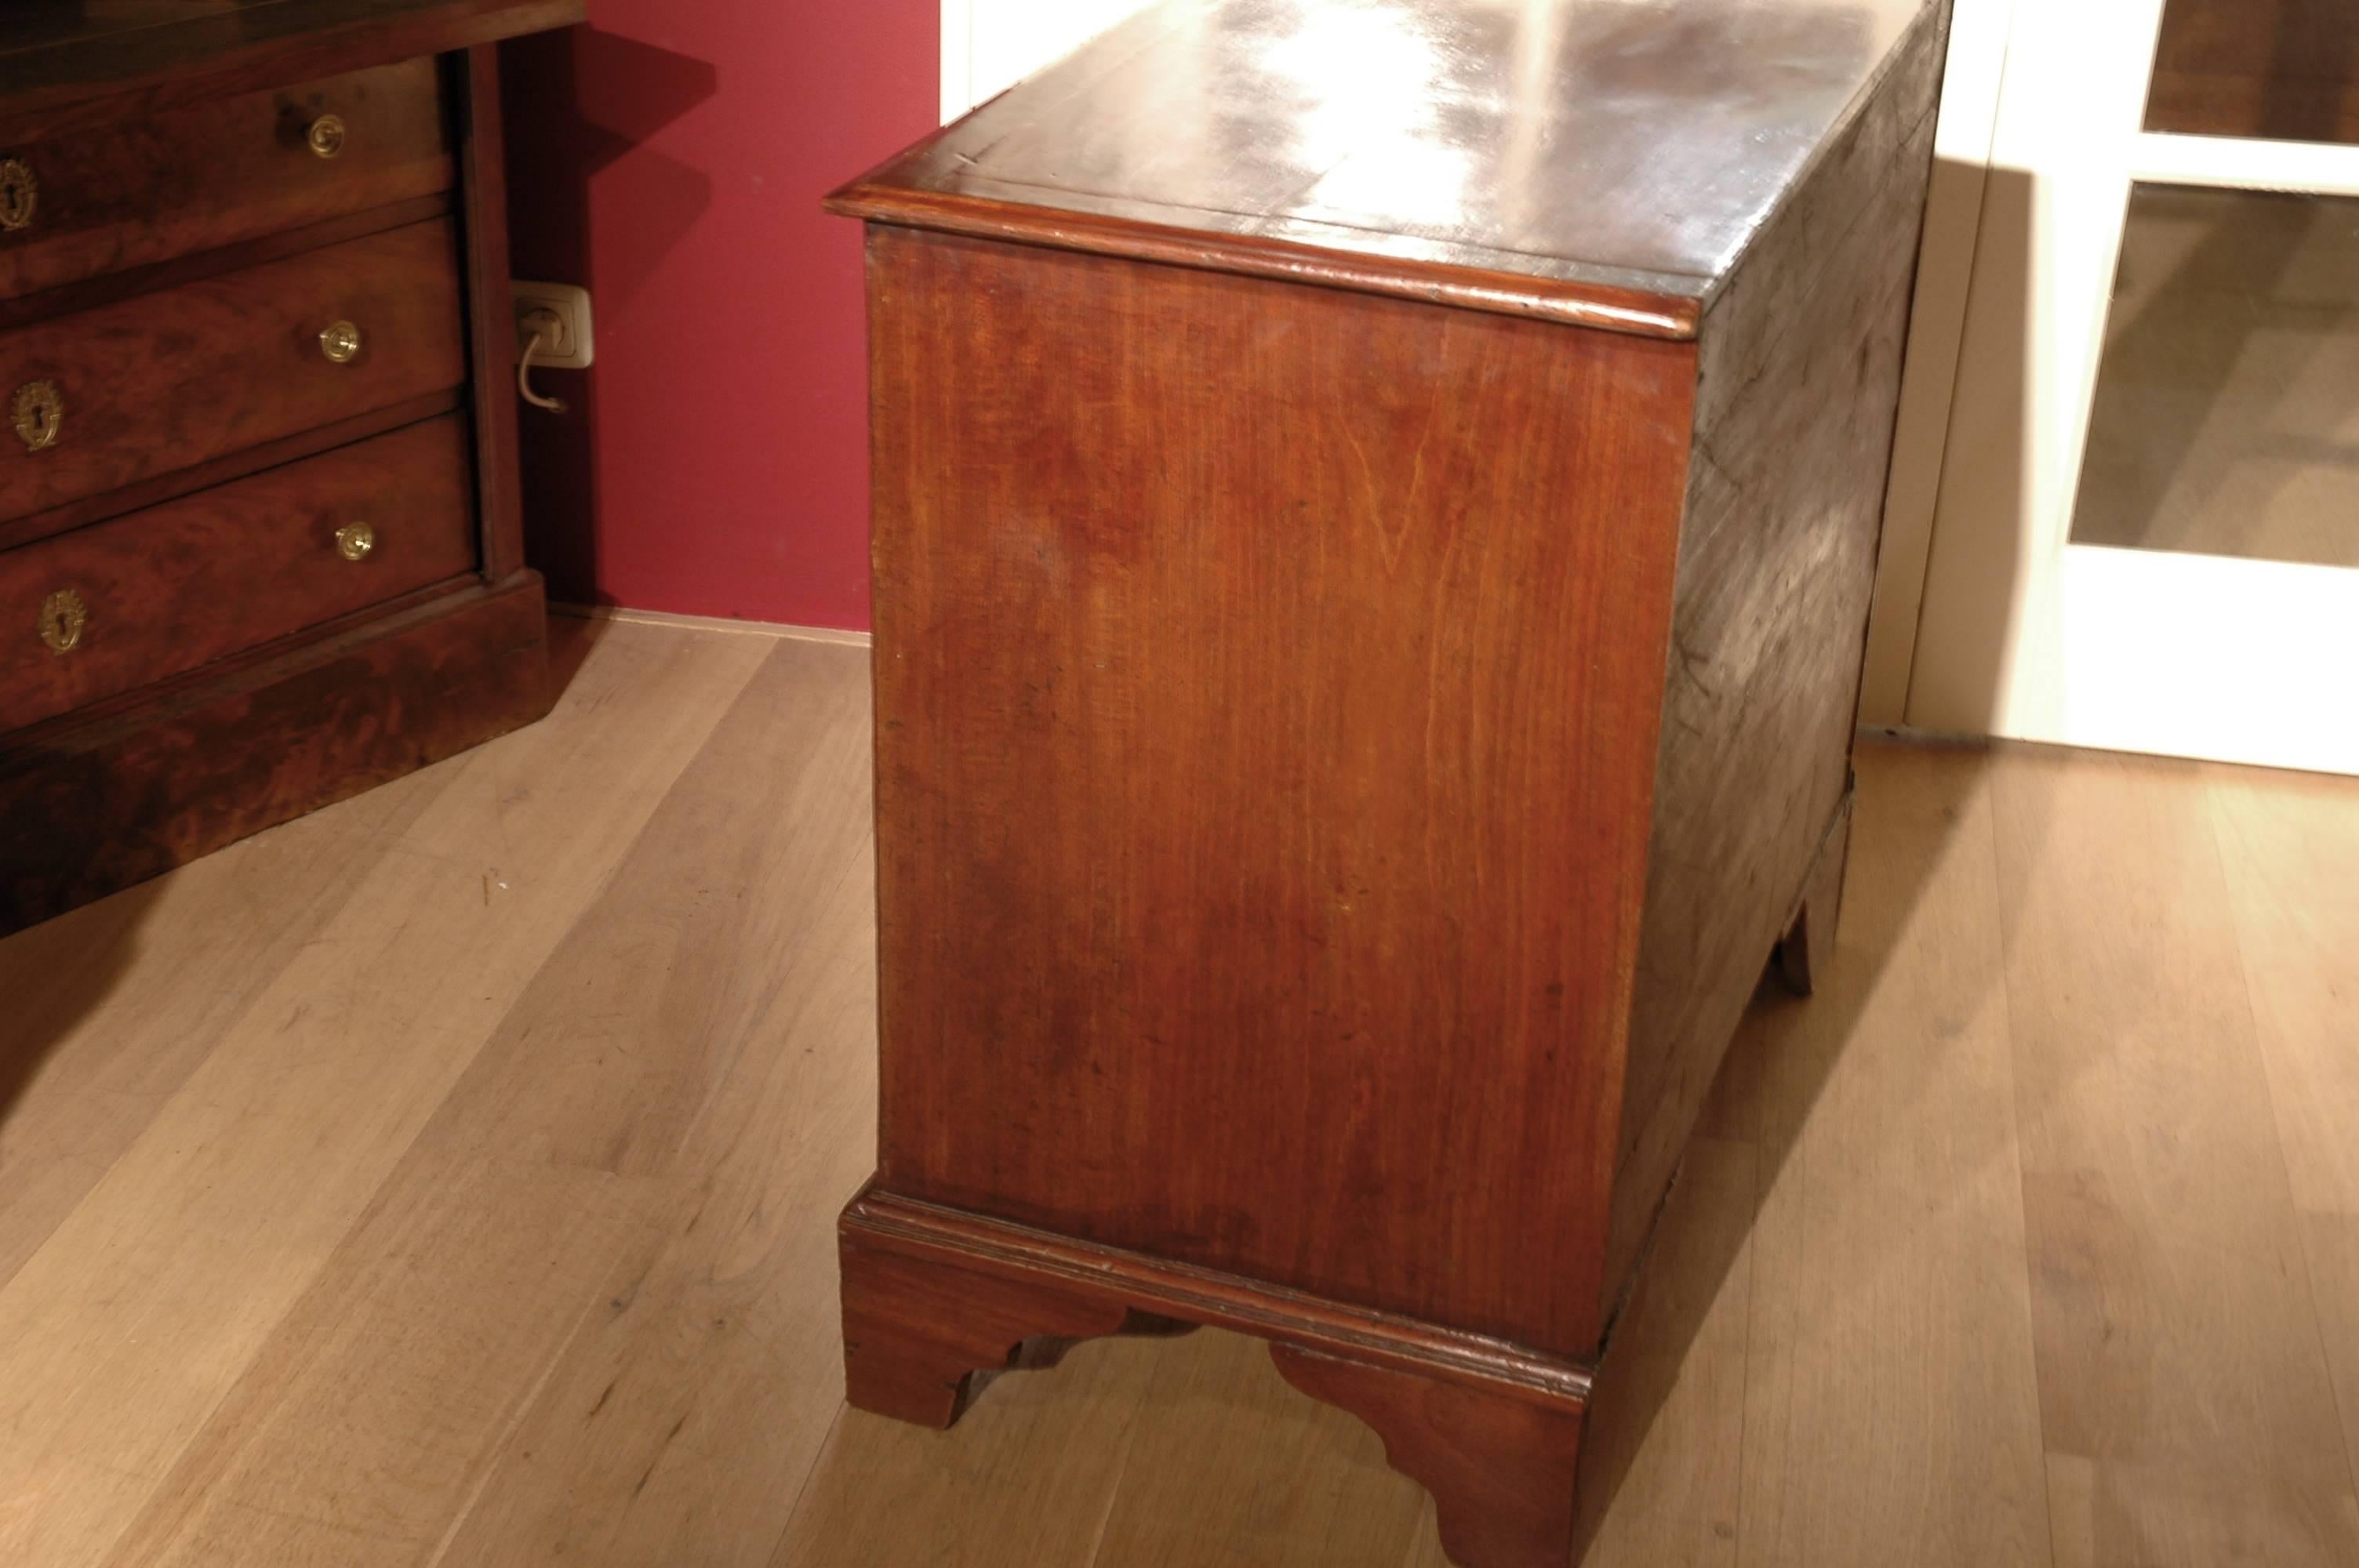 18th century chest of drawers